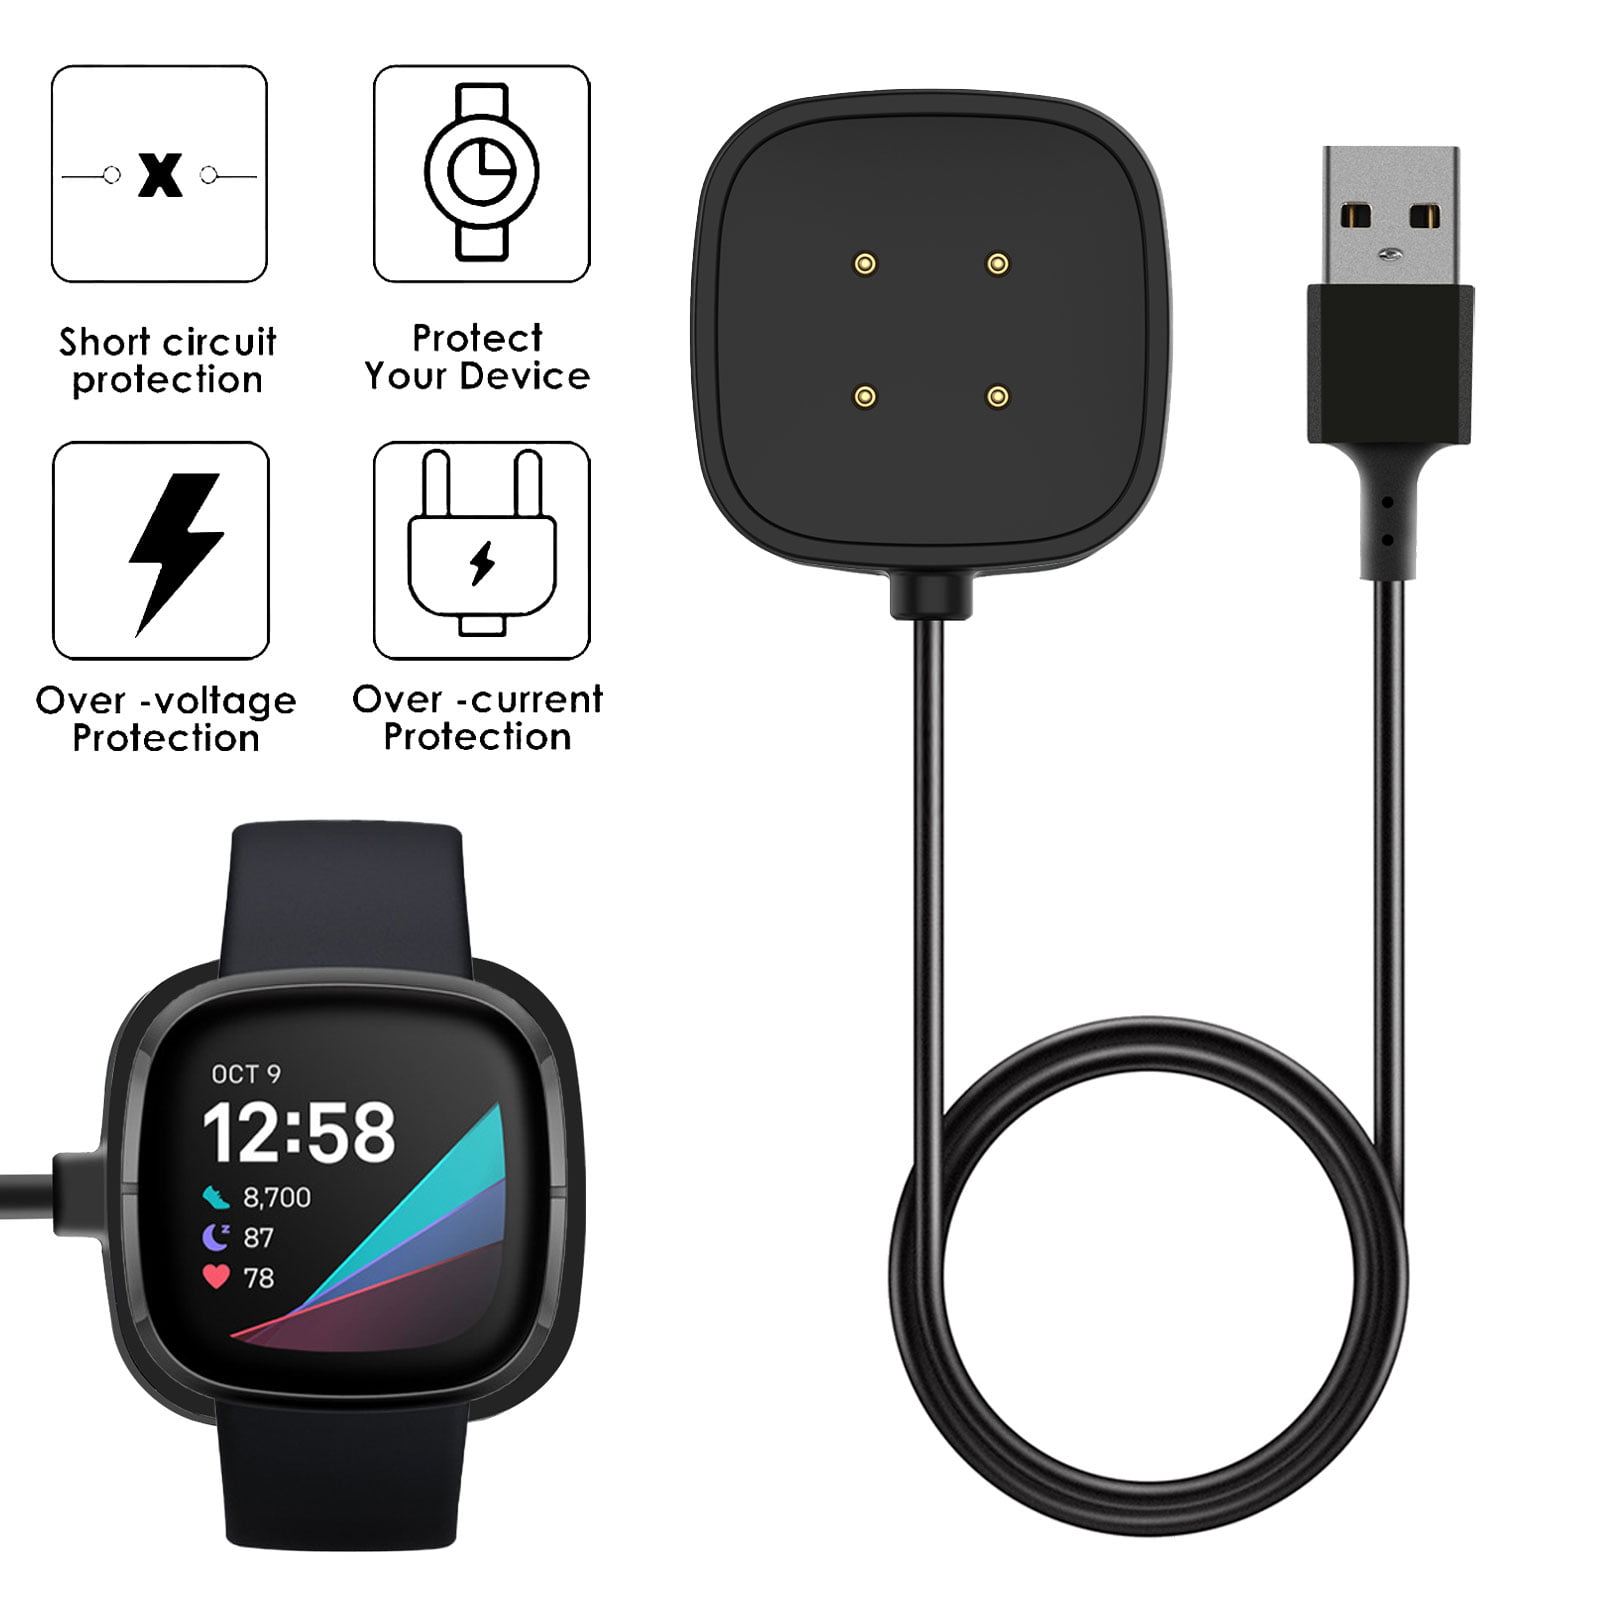 USB Replacement Charging Dock Station Cable Cord Charger for Fitbit Versa 2 for sale online 